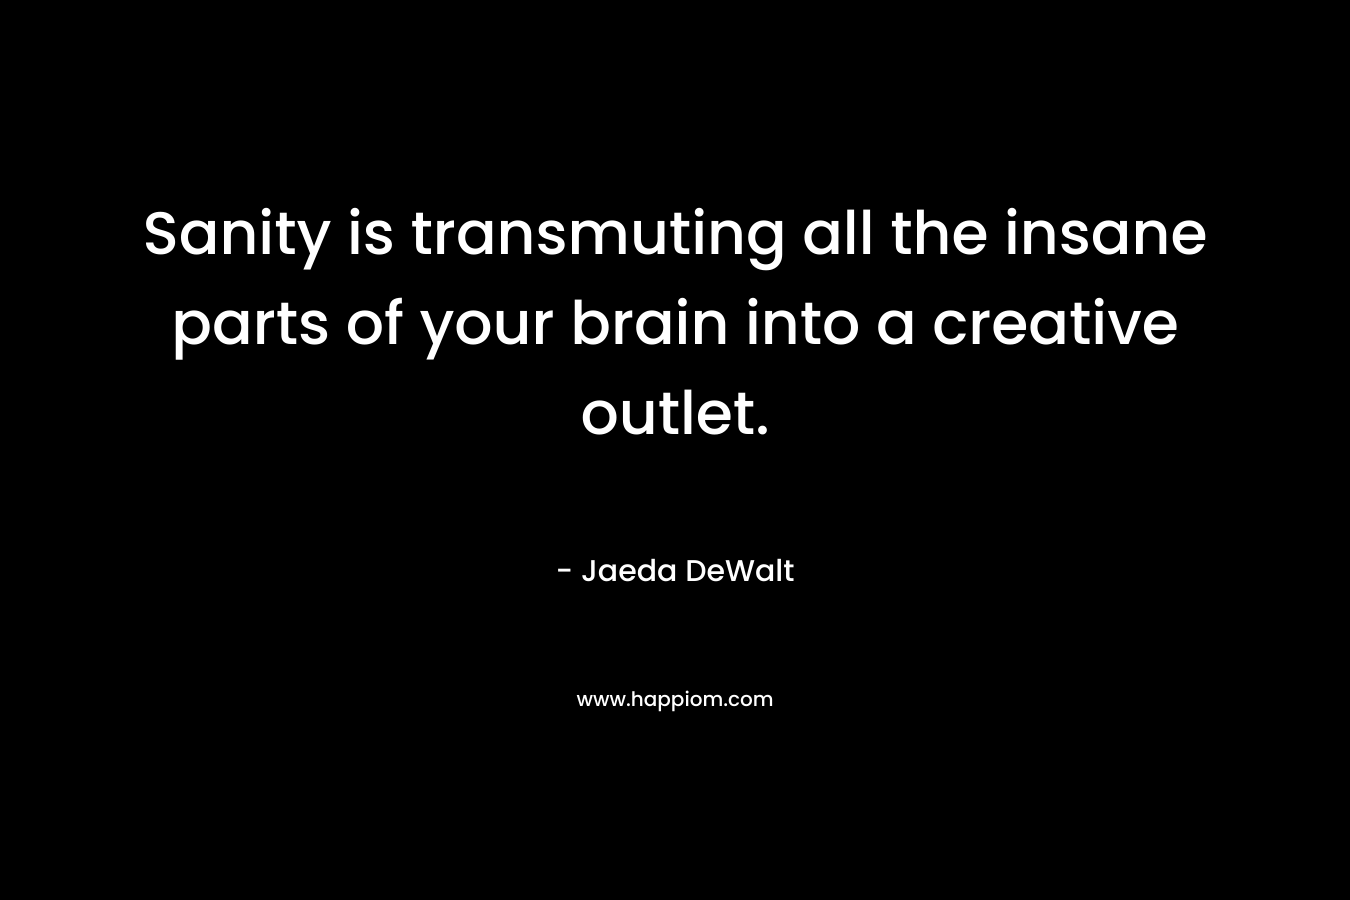 Sanity is transmuting all the insane parts of your brain into a creative outlet. – Jaeda DeWalt